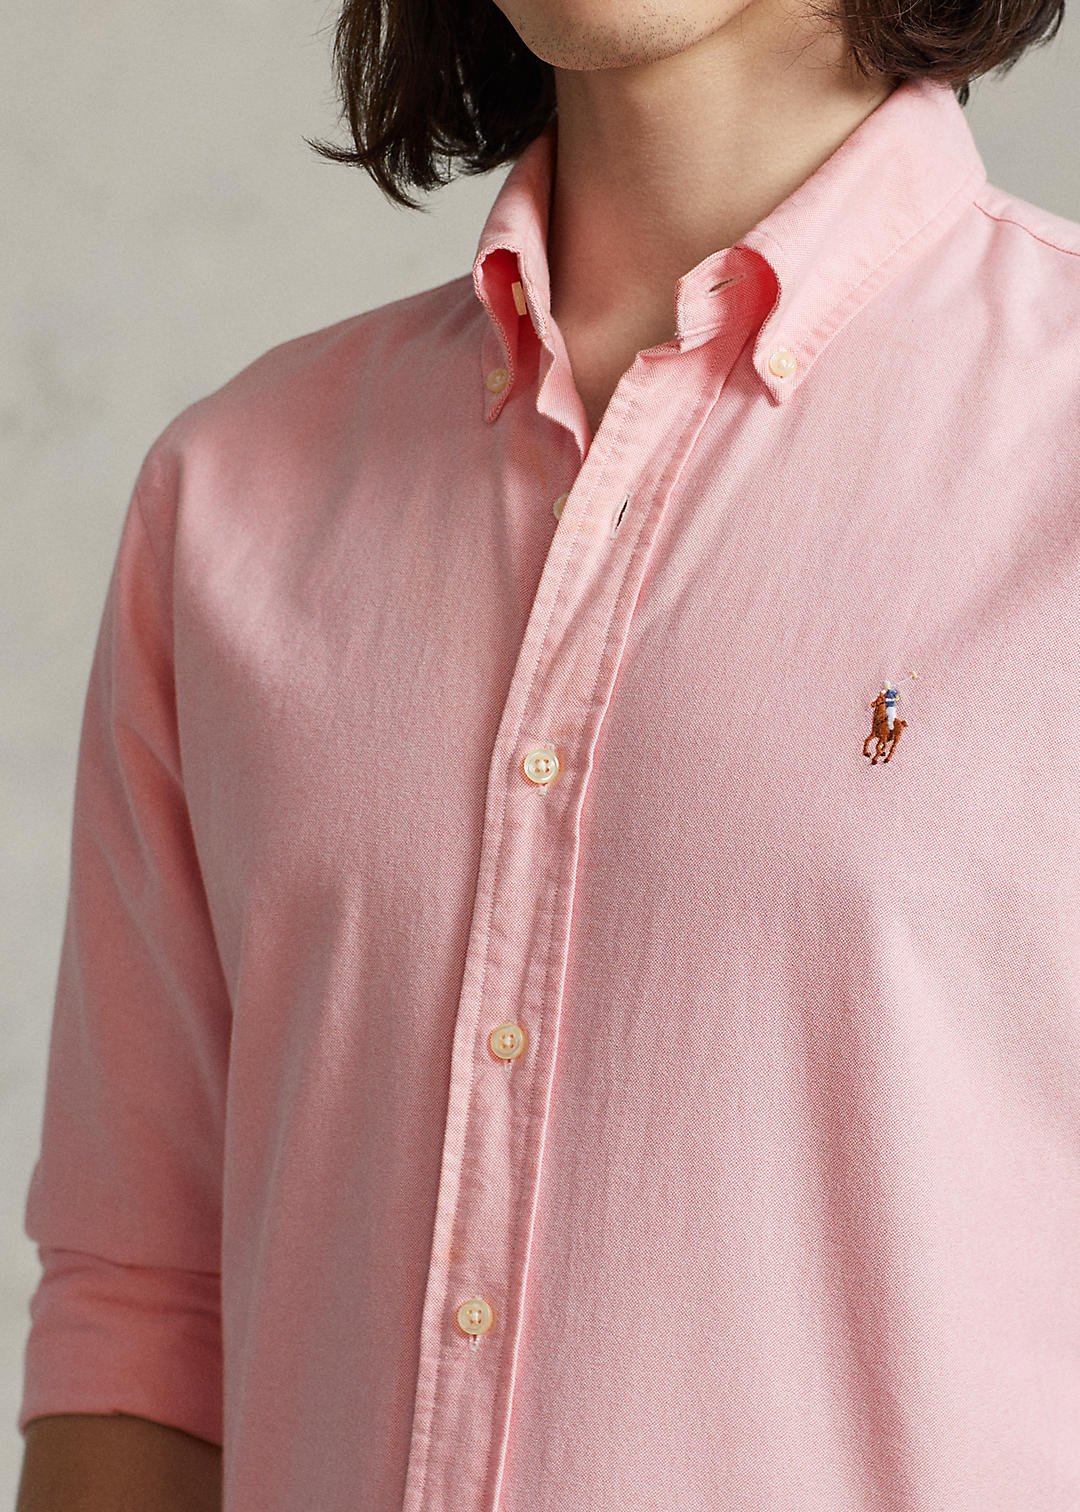 Polo Ralph Lauren The Iconic Oxford Shirt 6